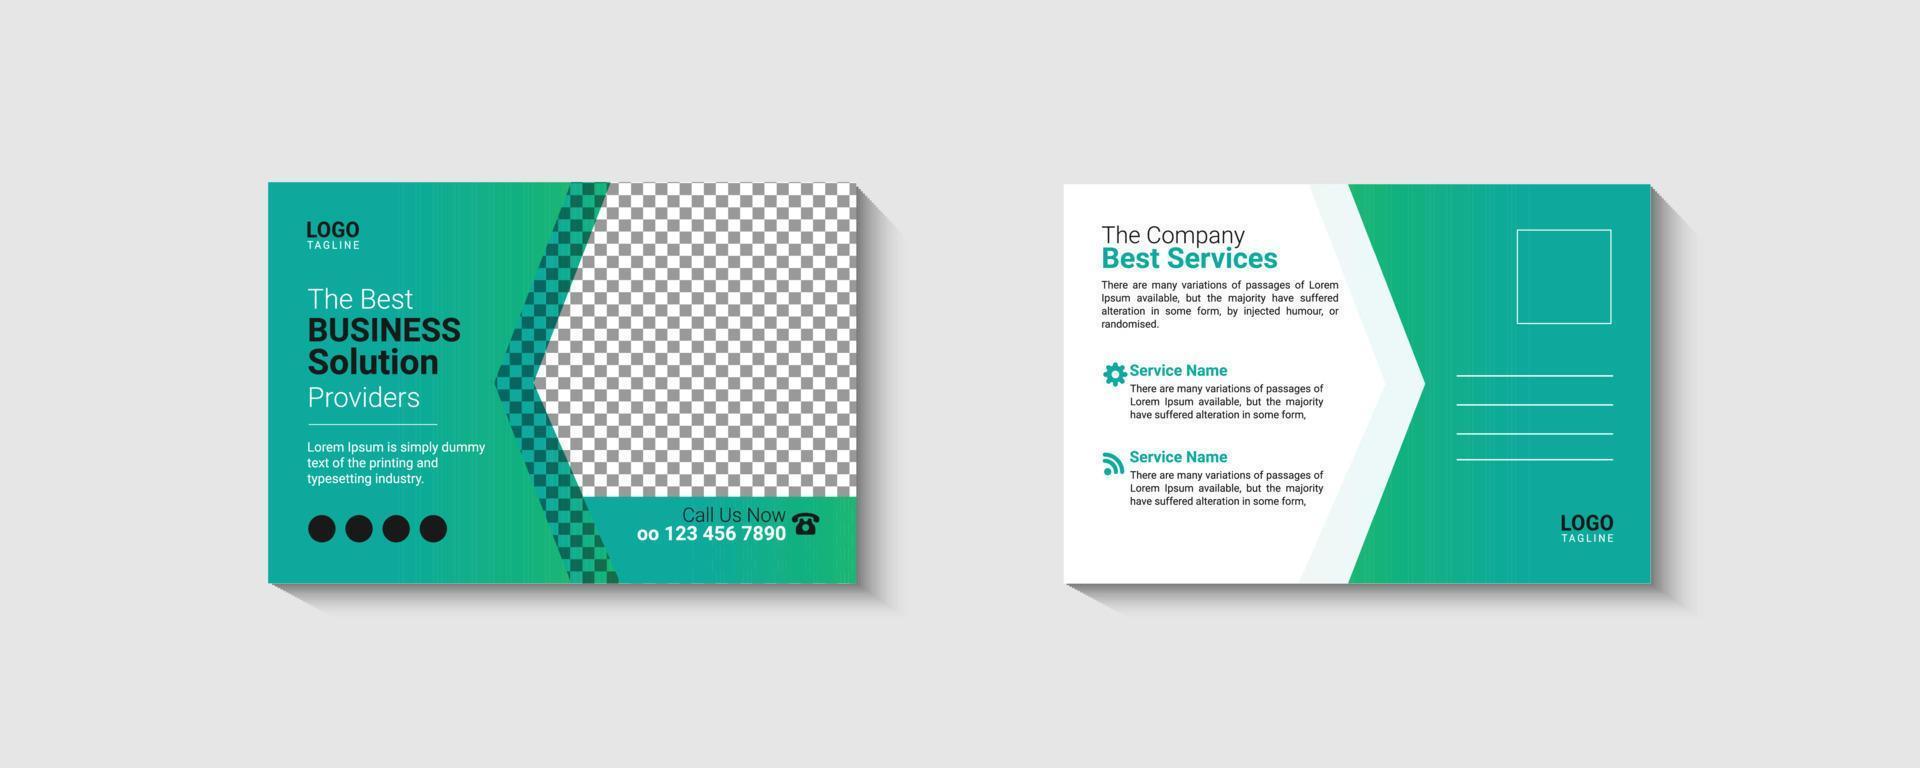 Business post card design template vector